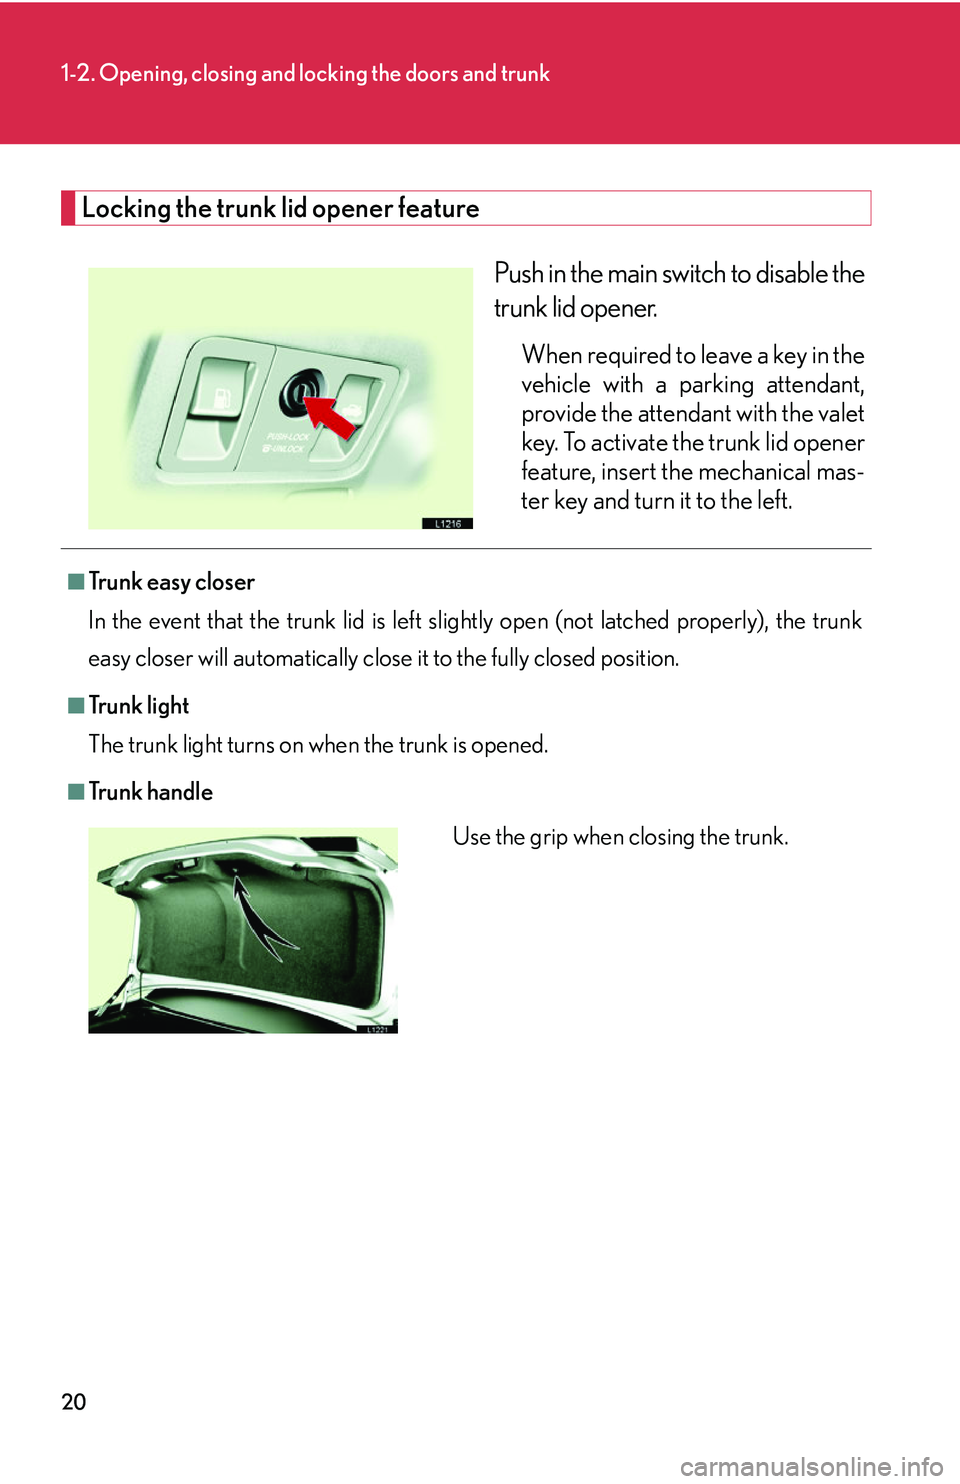 LEXUS LS430 2006 Owners Guide 20
1-2. Opening, closing and locking the doors and trunk
Locking the trunk lid opener feature
Push in the main switch to disable the 
trunk lid opener. 
When required to leave a key in the 
vehicle wi